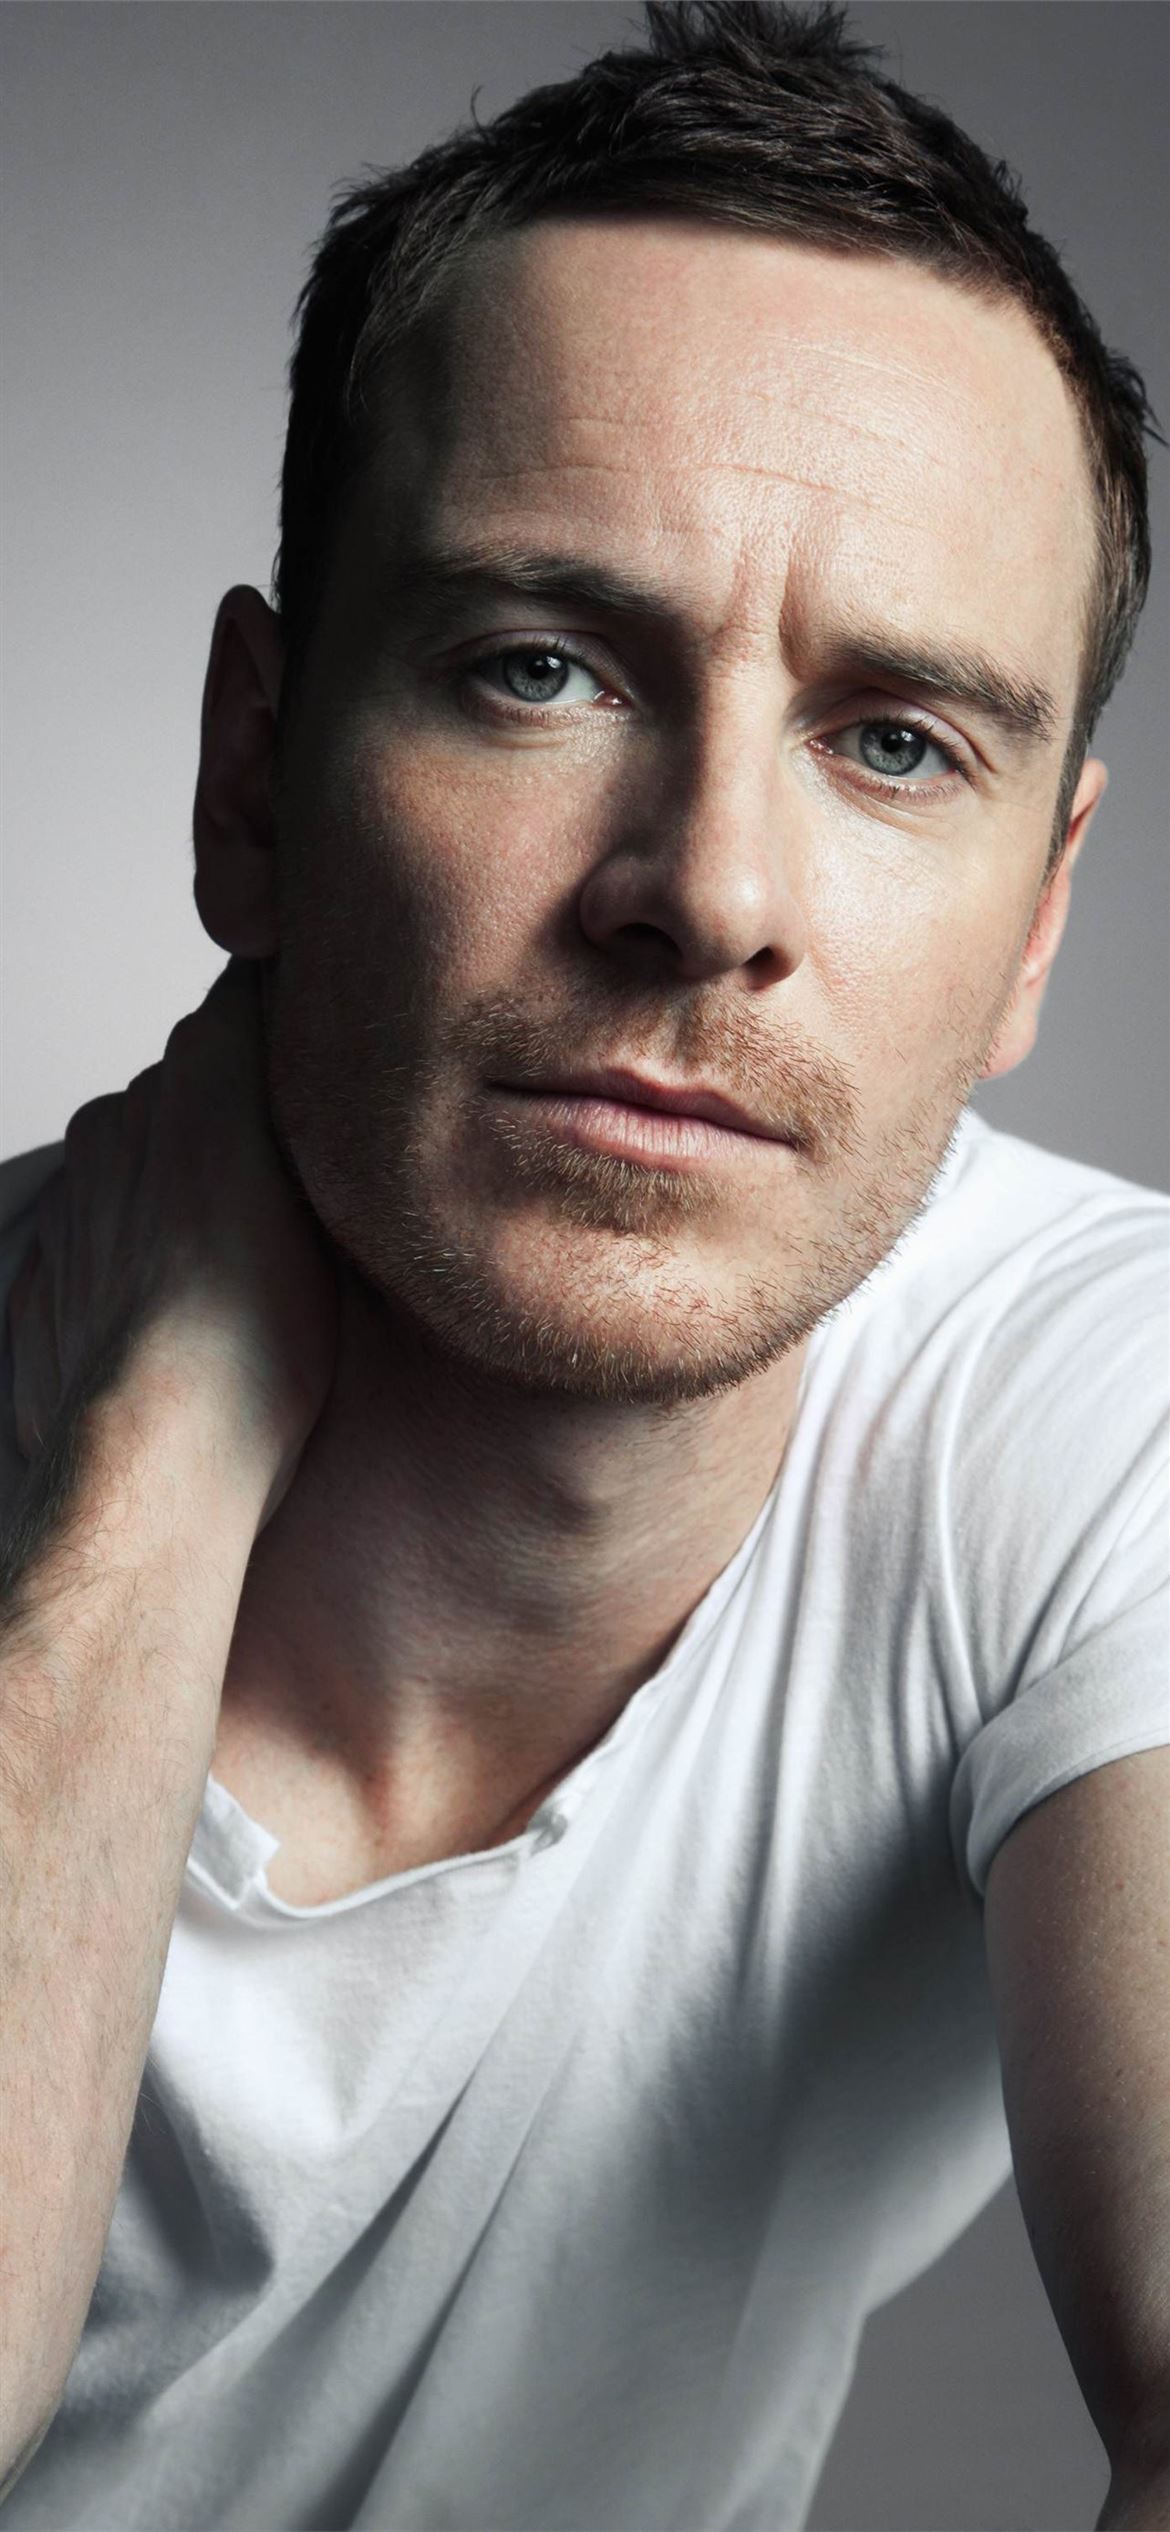 Michael Fassbender Iphone Wallpapers Free Download 